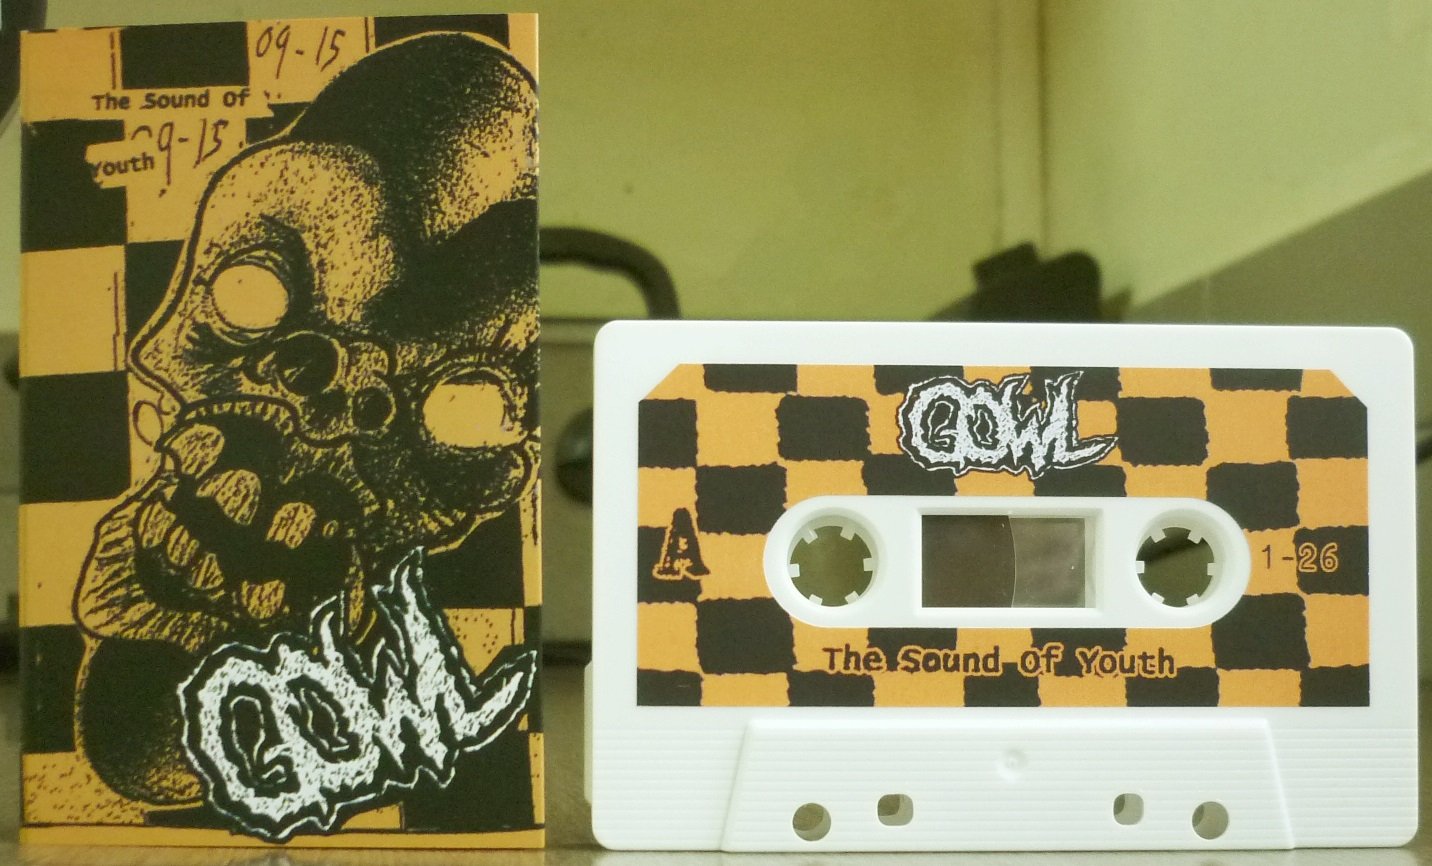 GOWL "The Sound Of Youth" Tape